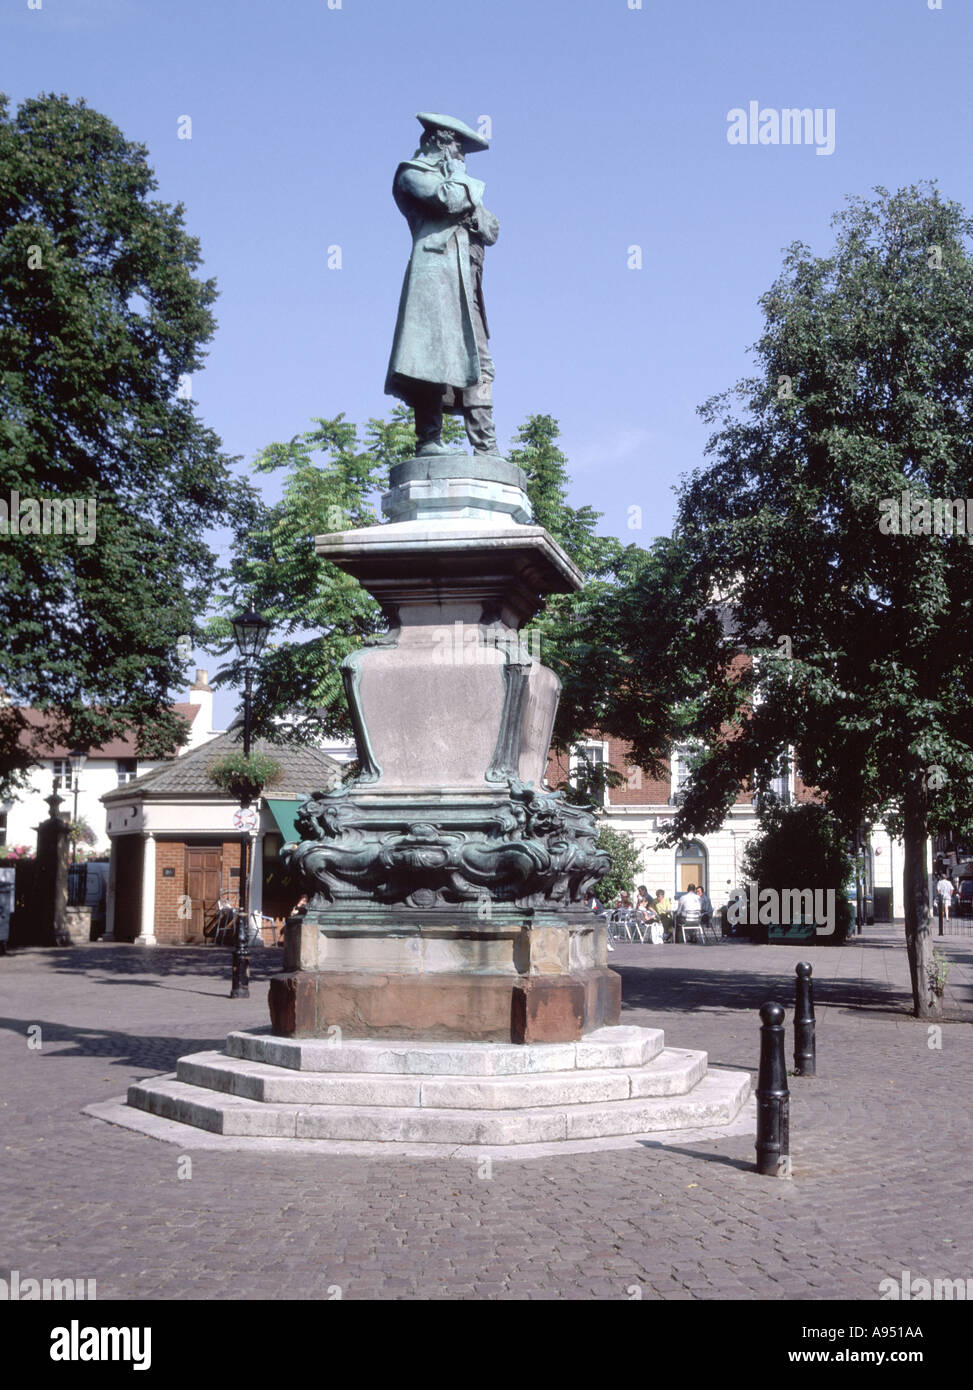 Statue of John Howard local man known for his prison reform work The Howard League for Penal Reform is named after him Bedford Bedfordshire England UK Stock Photo